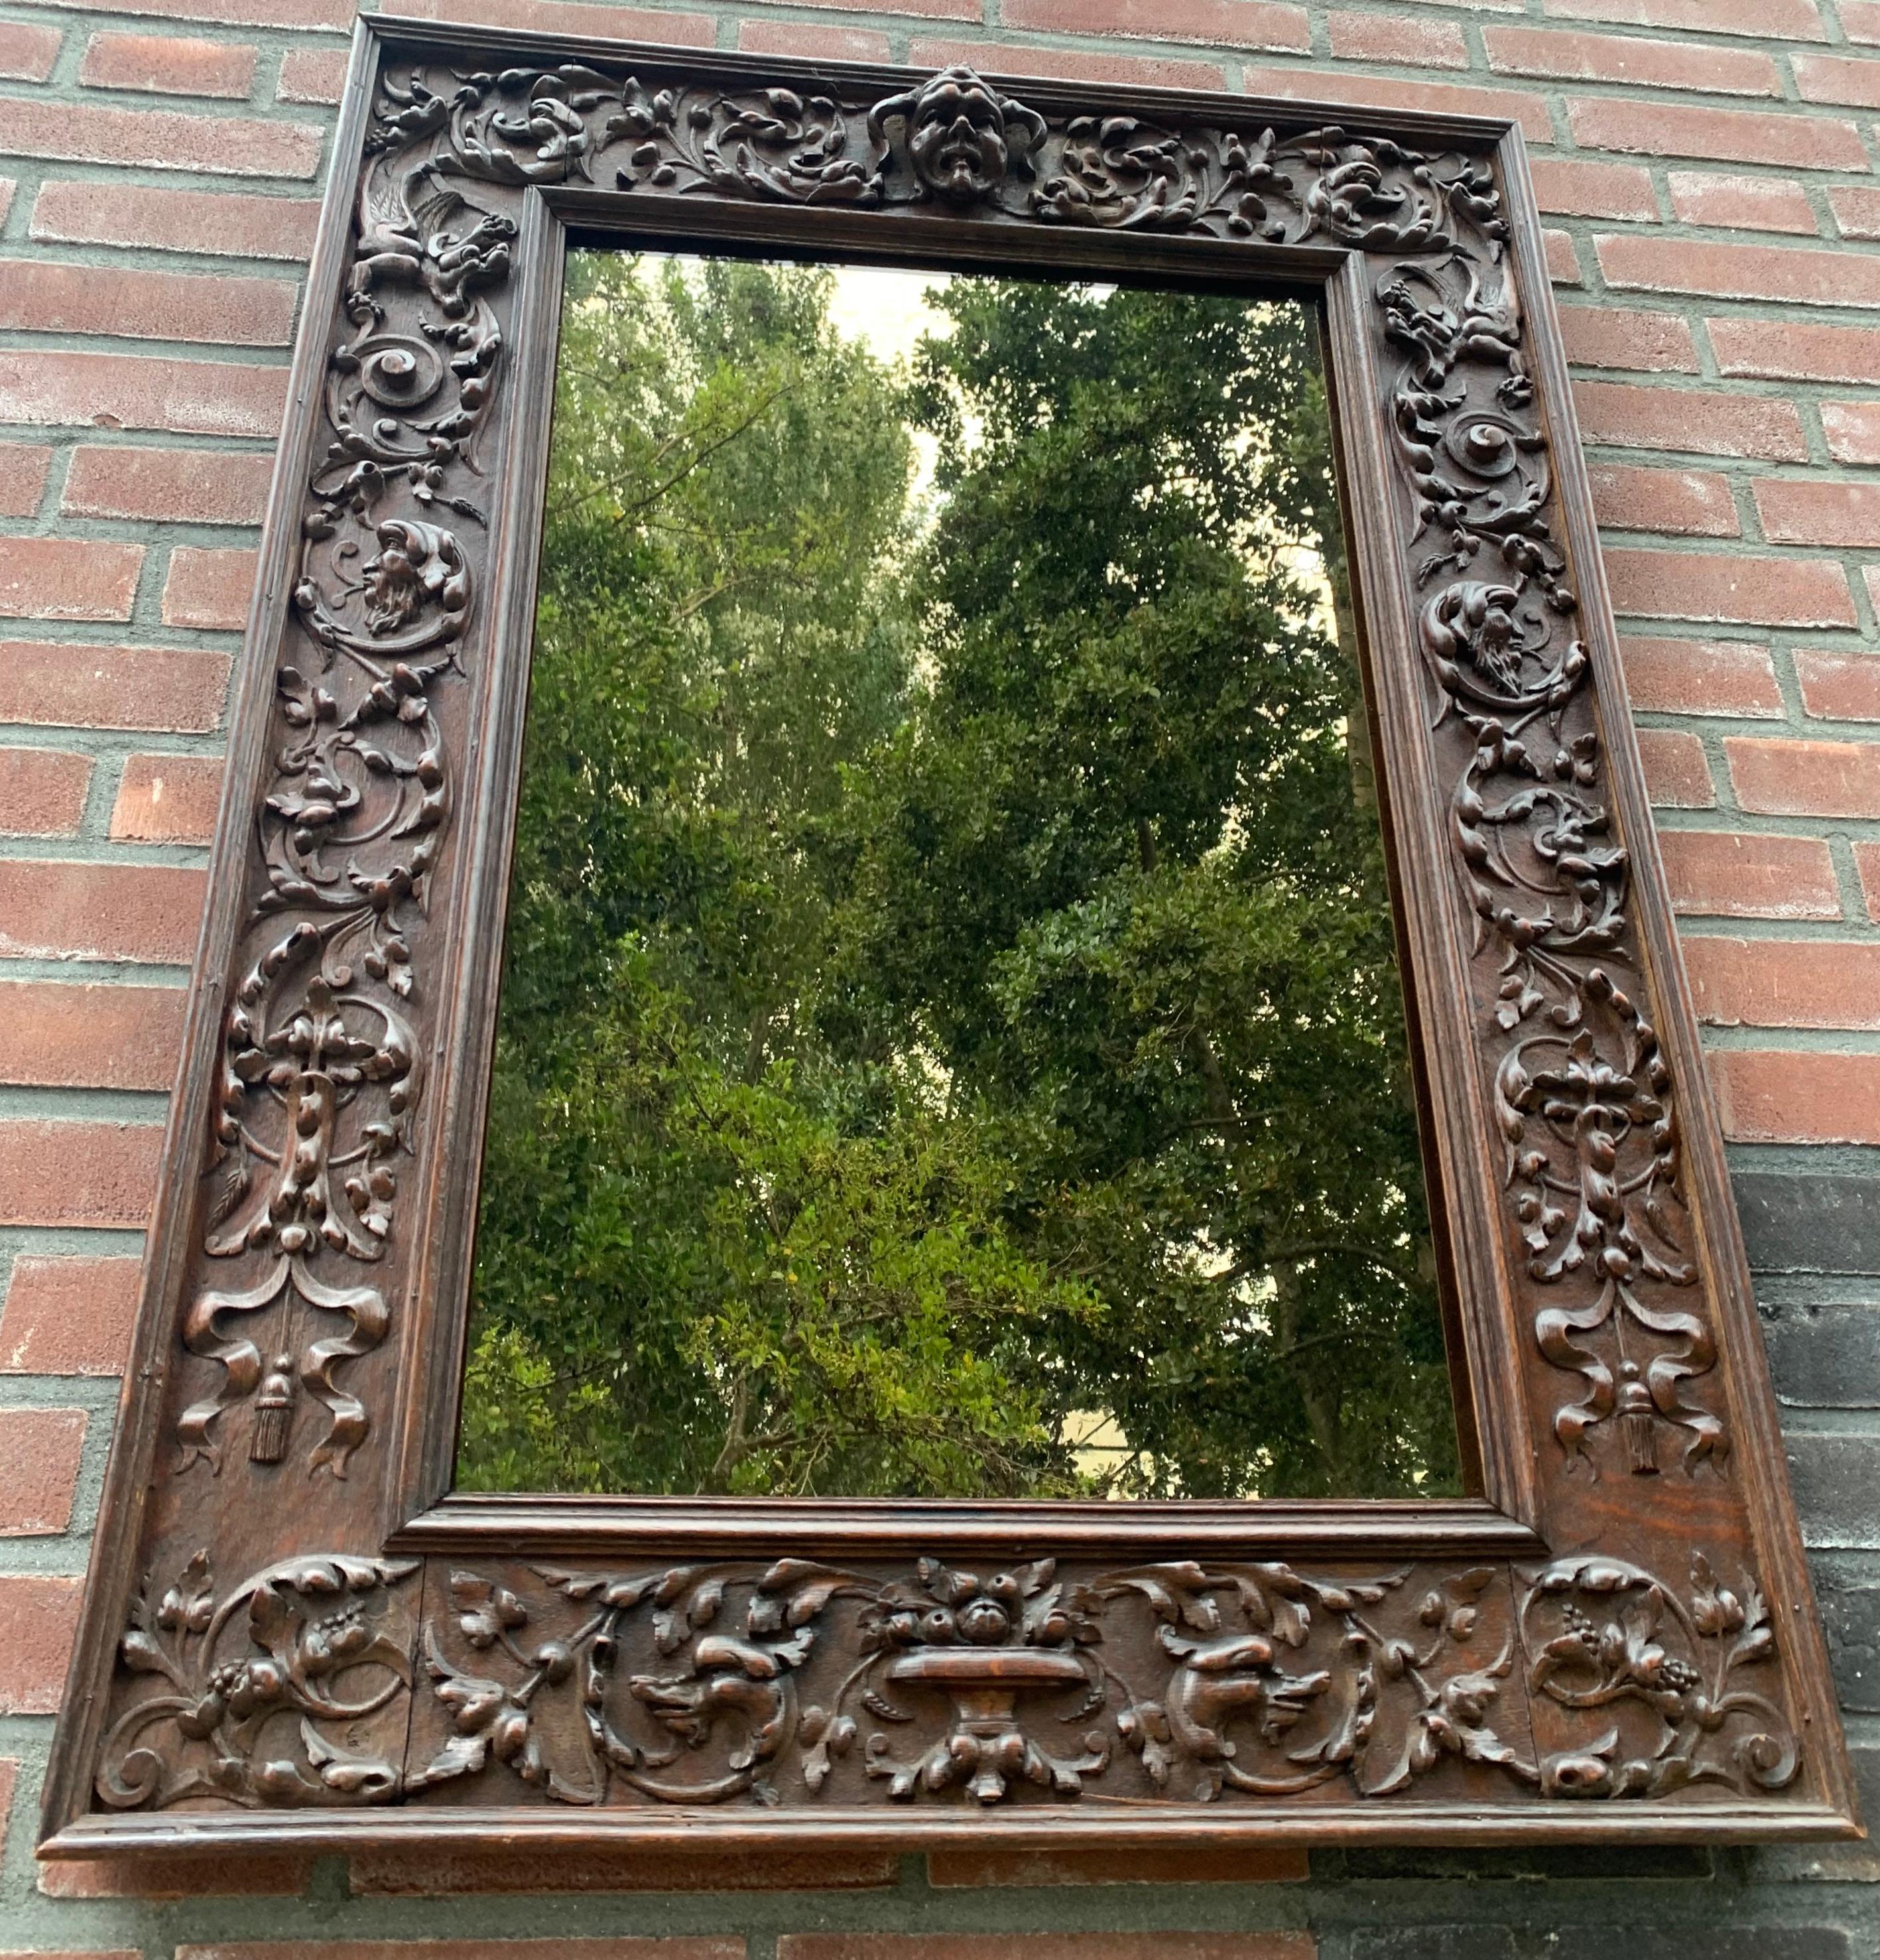 Stunning early antique Italian wall mirror with pen-hole connections.

Most antique collectors and enthusiasts buy their antiques, because the quality of the workmanship is something that is unlikely to ever return. If you understand how difficult